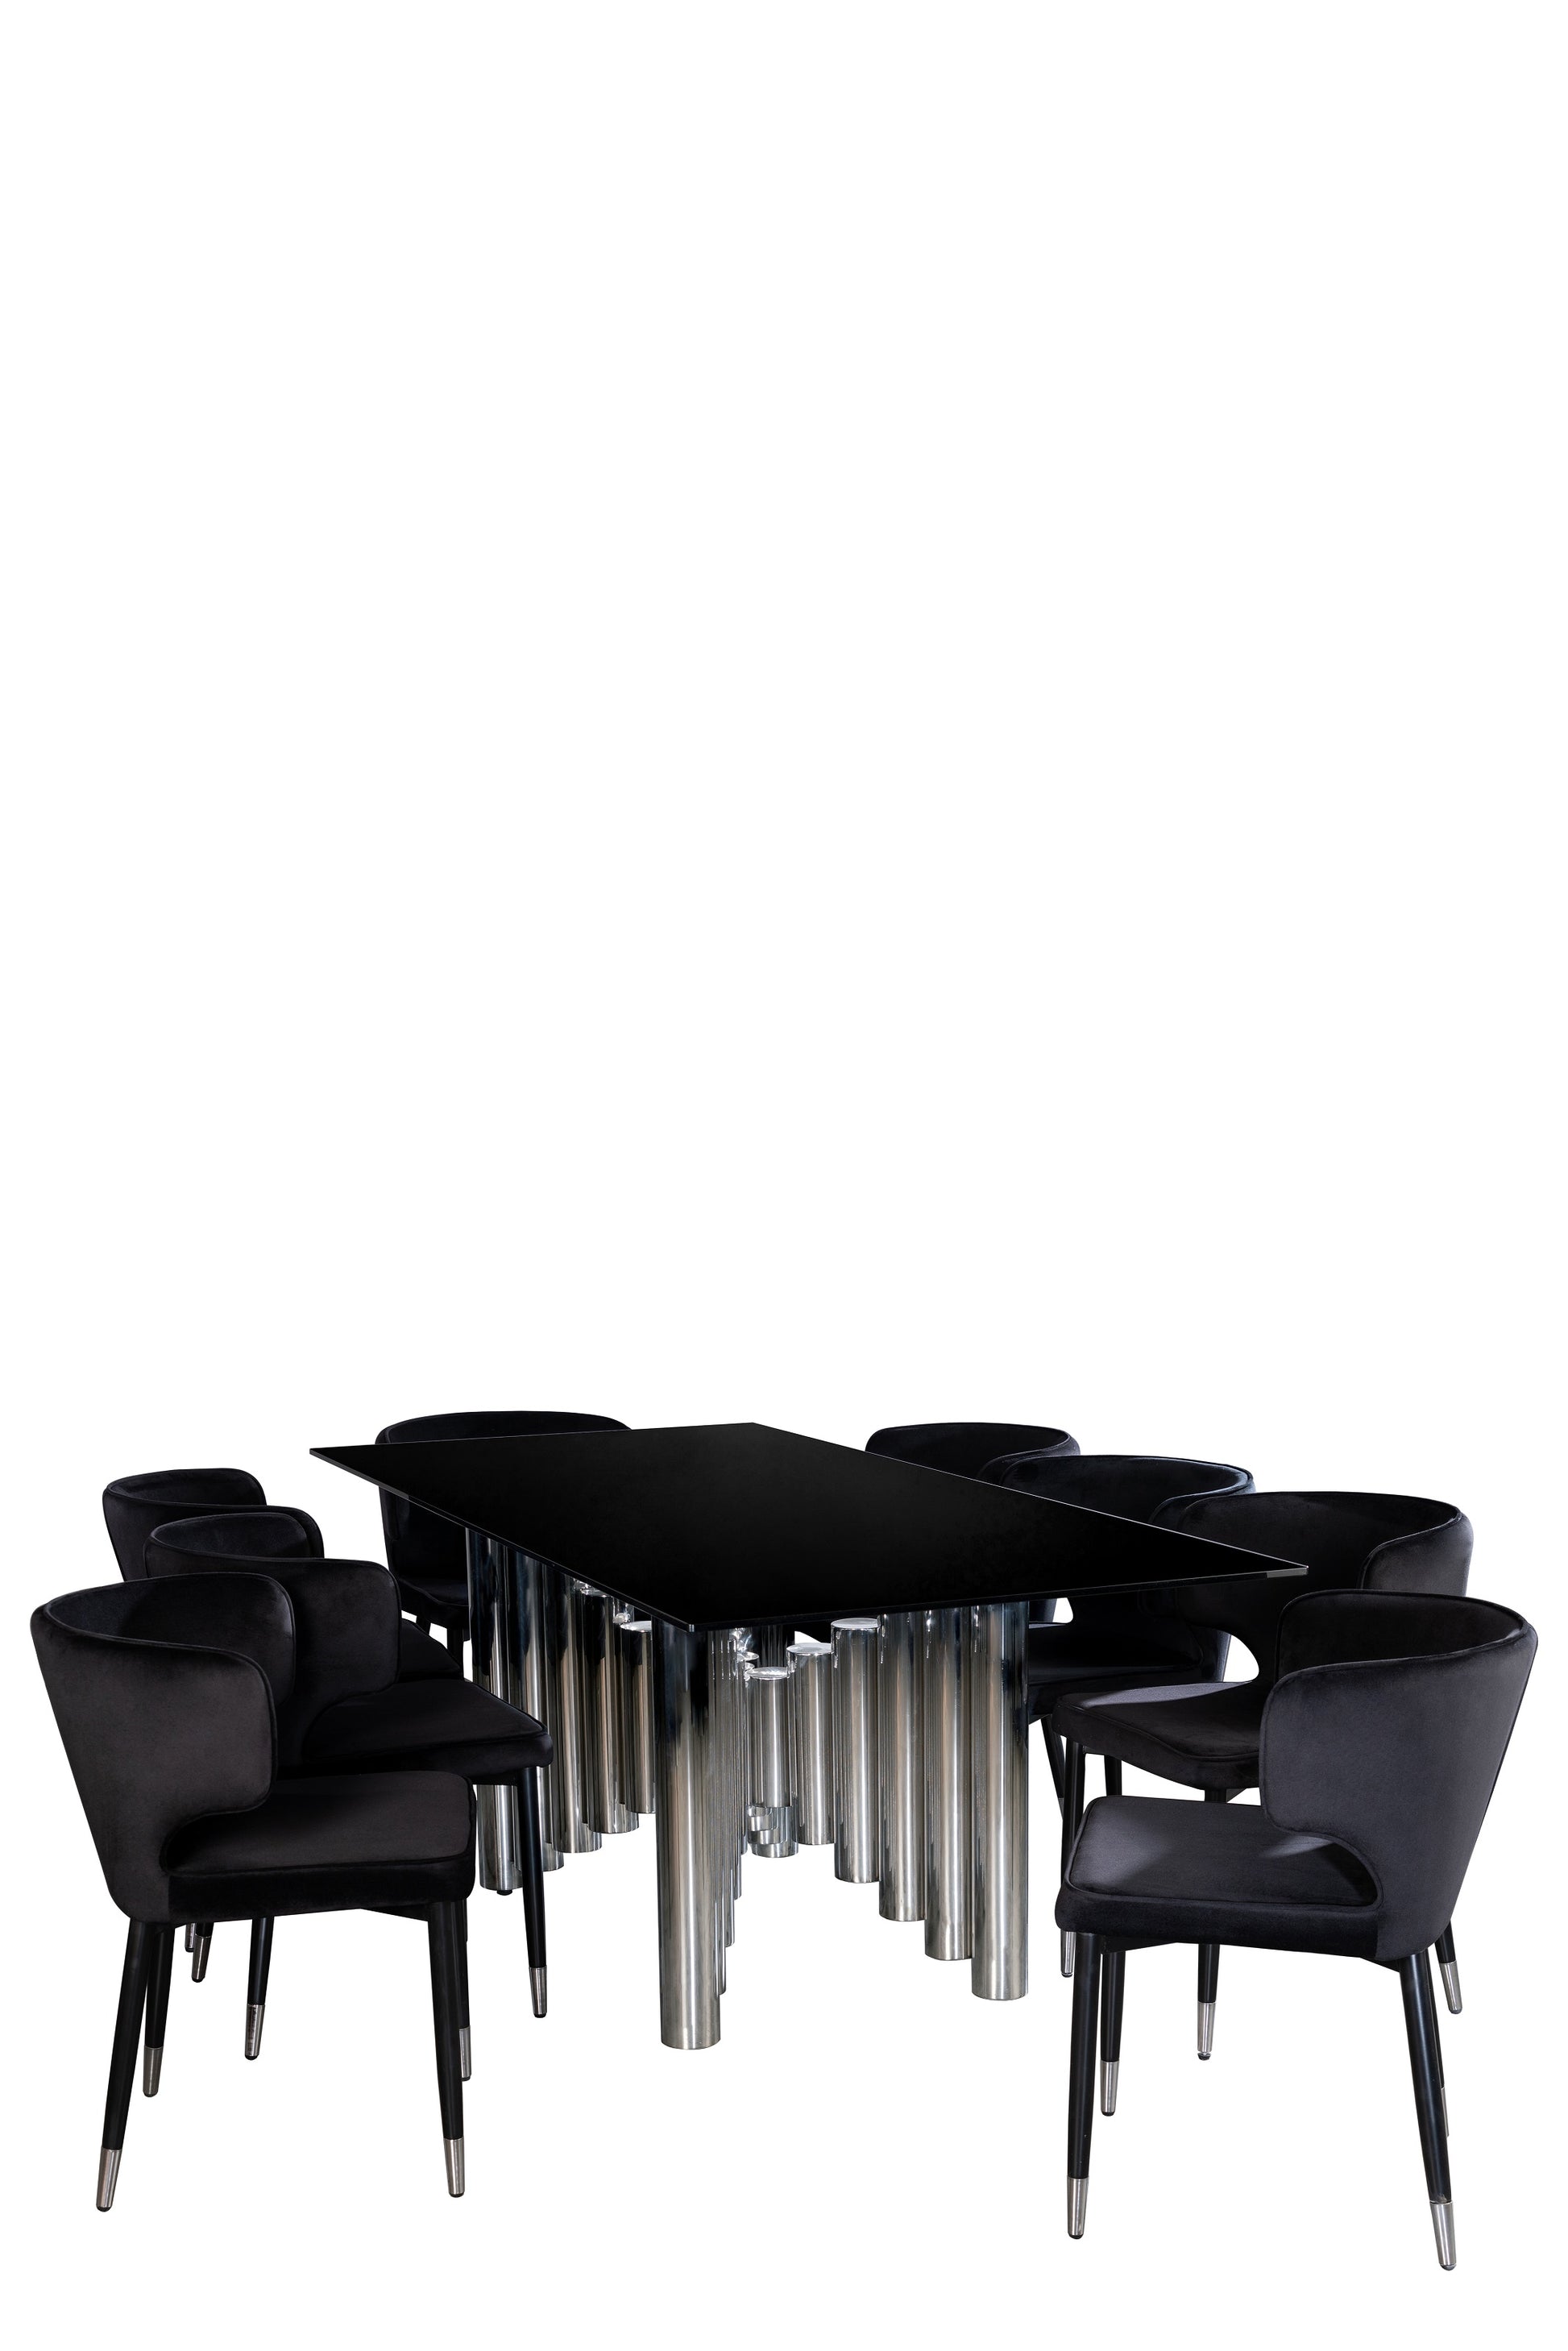 glass top modern black and silver dining table set 